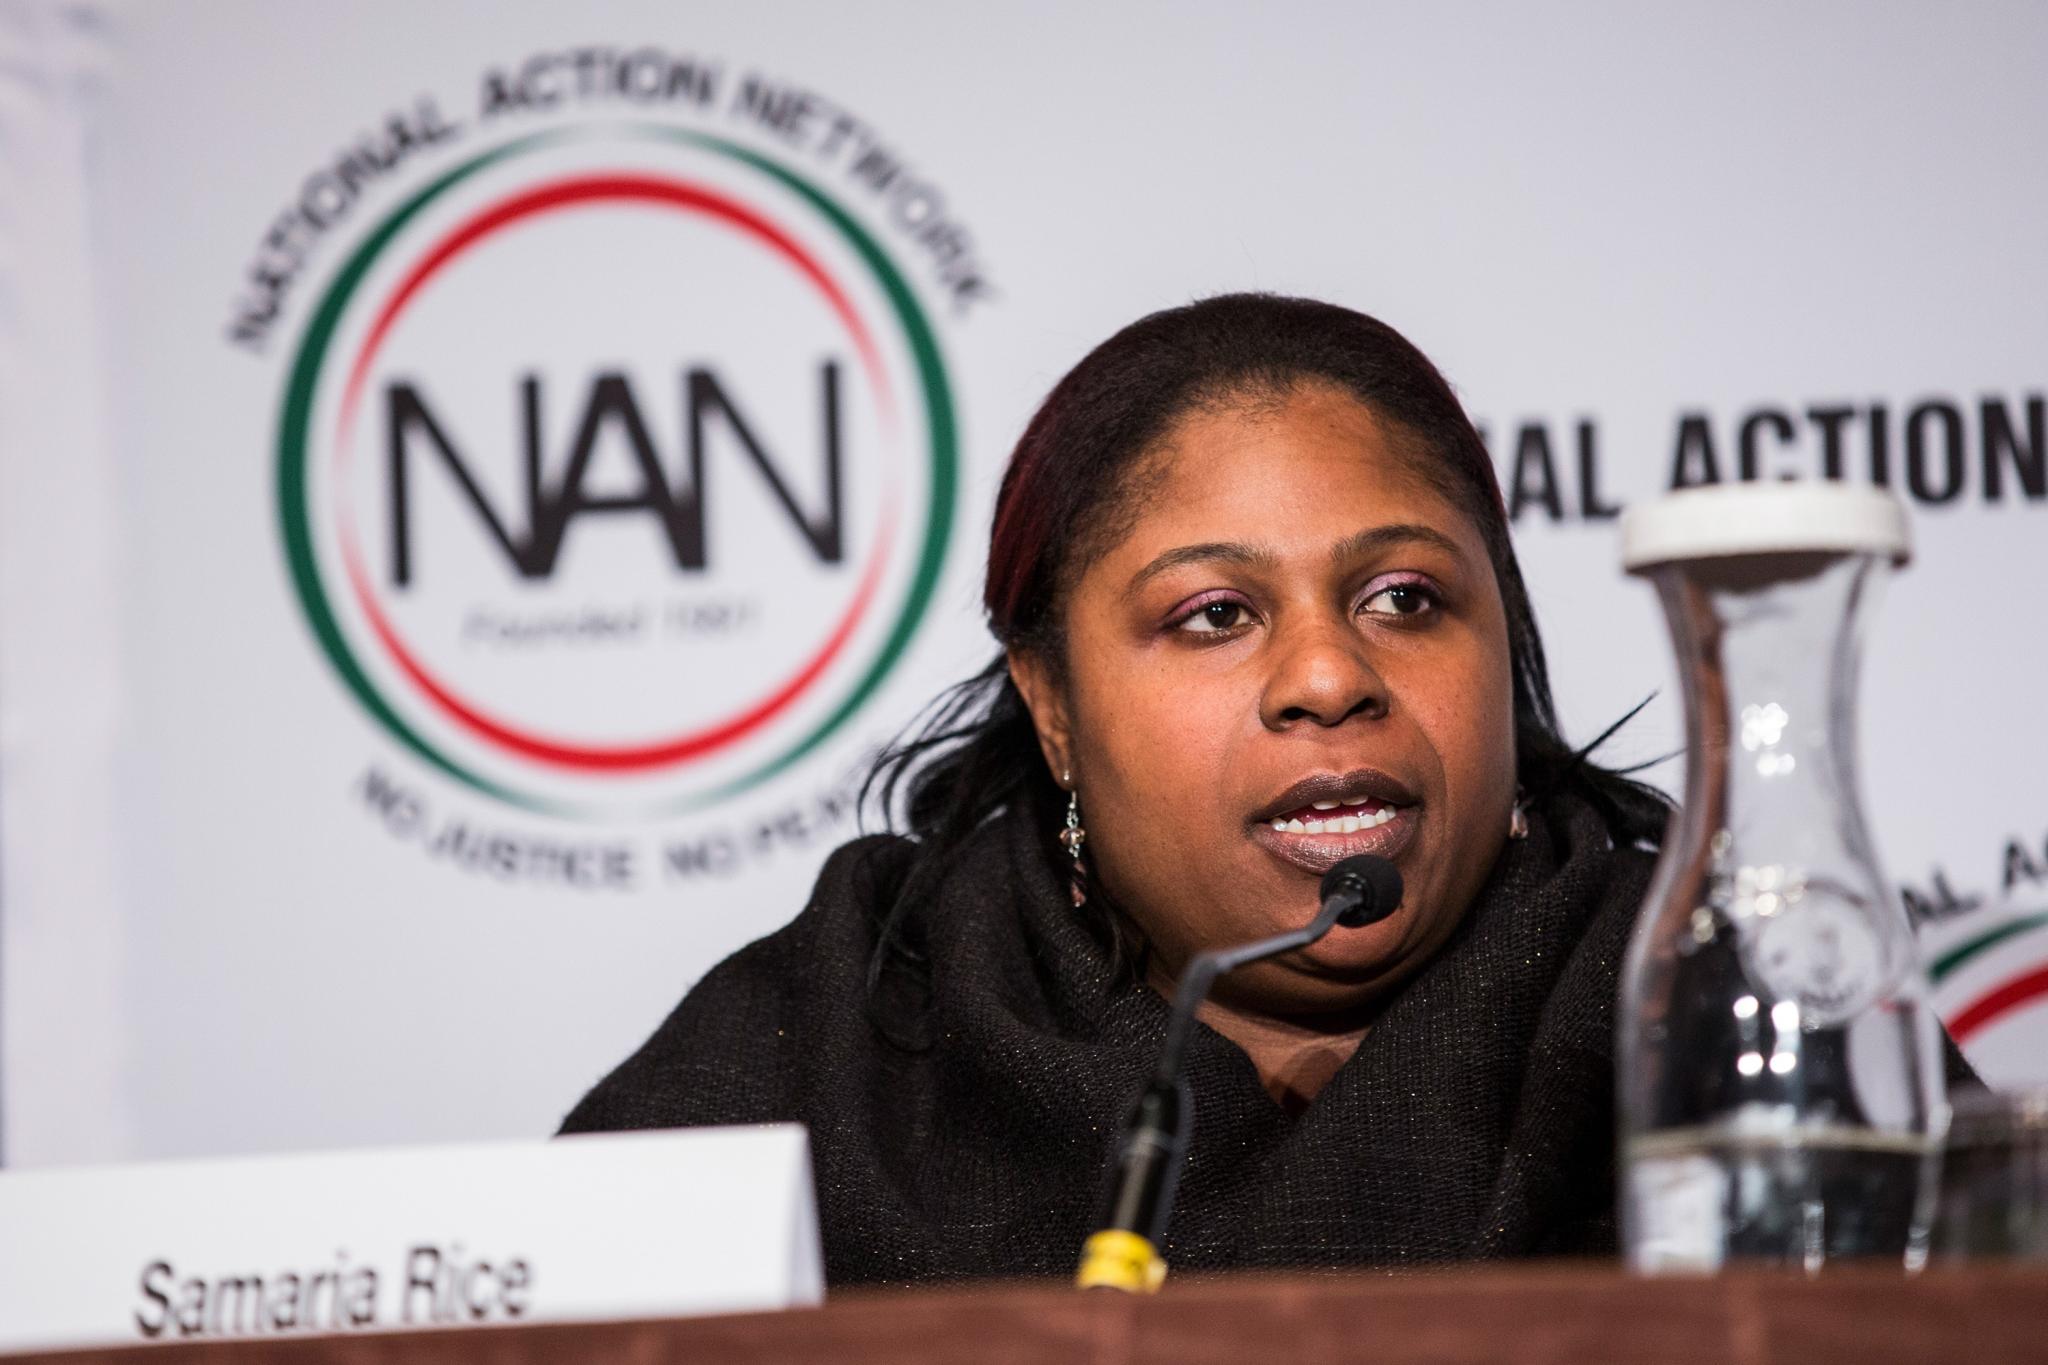 Tamir Rice’s Mother: ‘It’s Sad LeBron James Hasn’t Spoken Out About My Son’